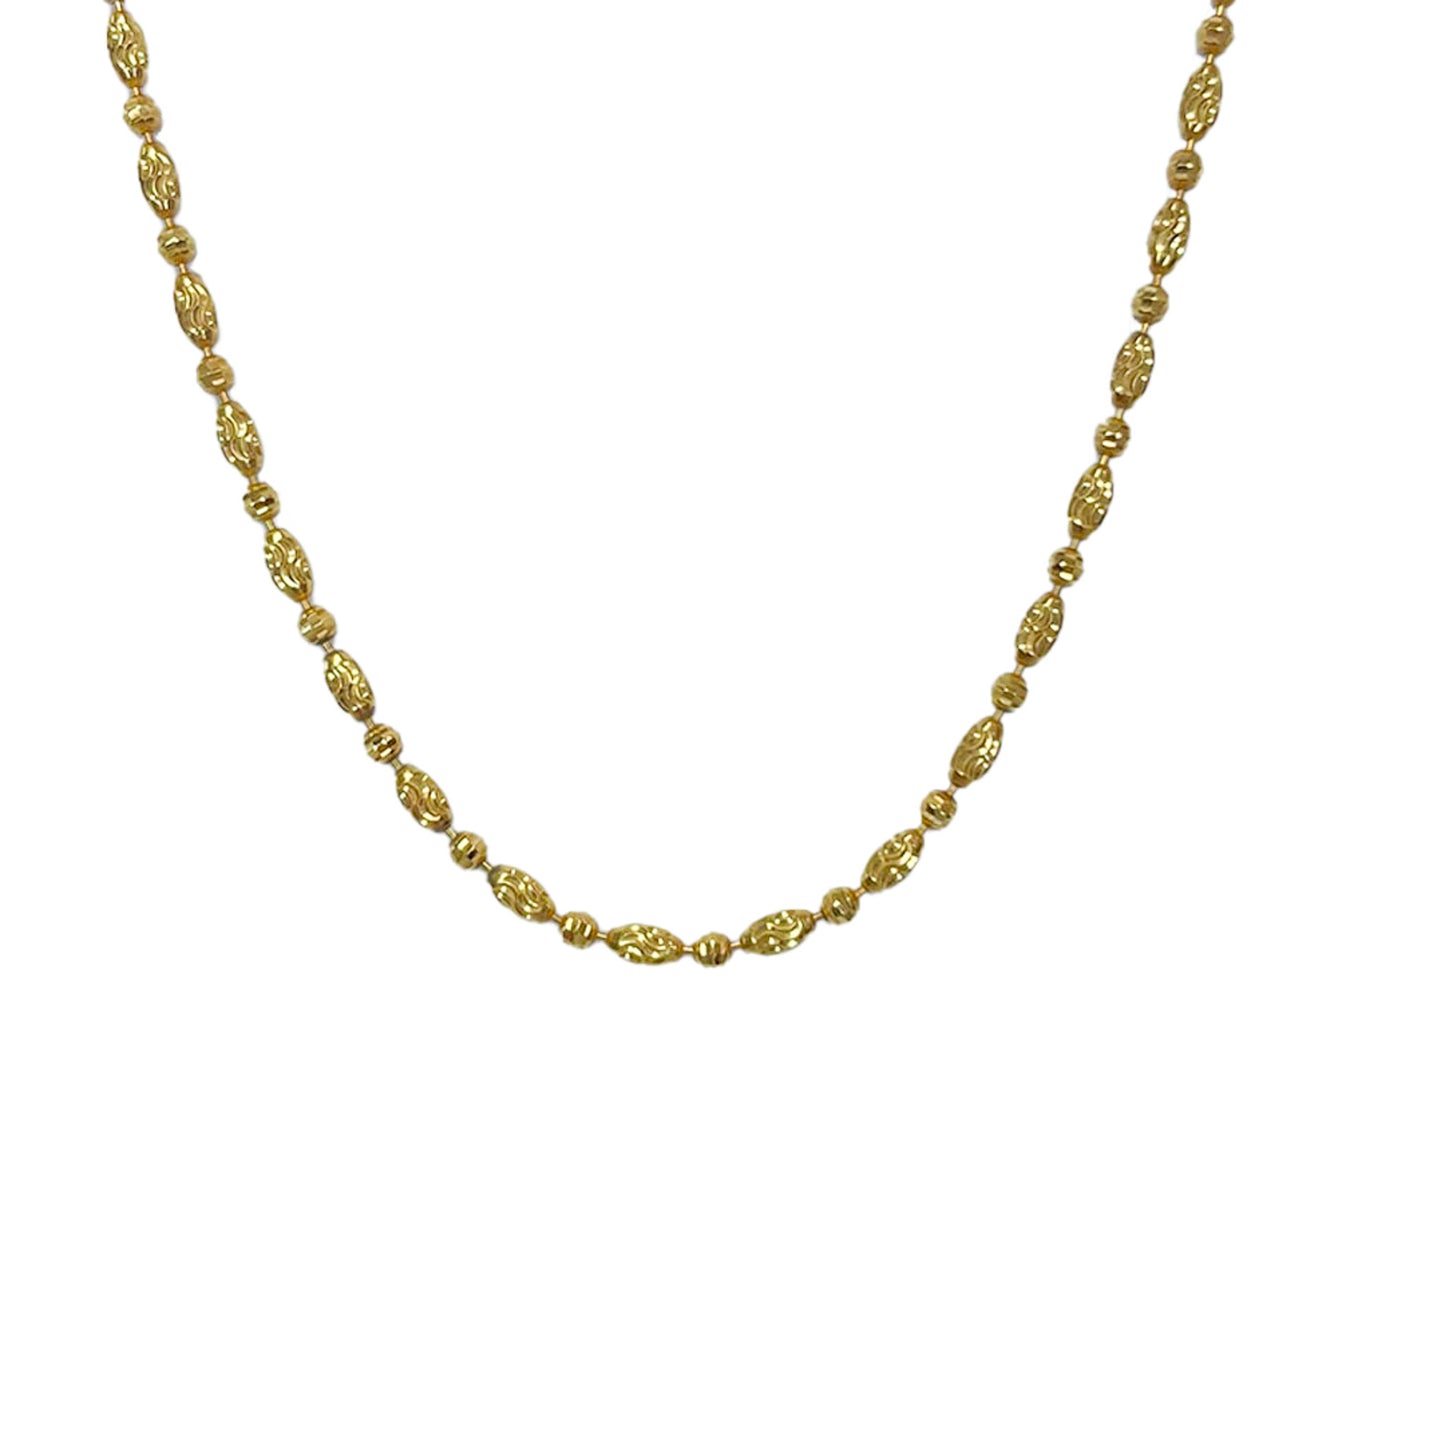 Yellow Gold Beaded Necklace